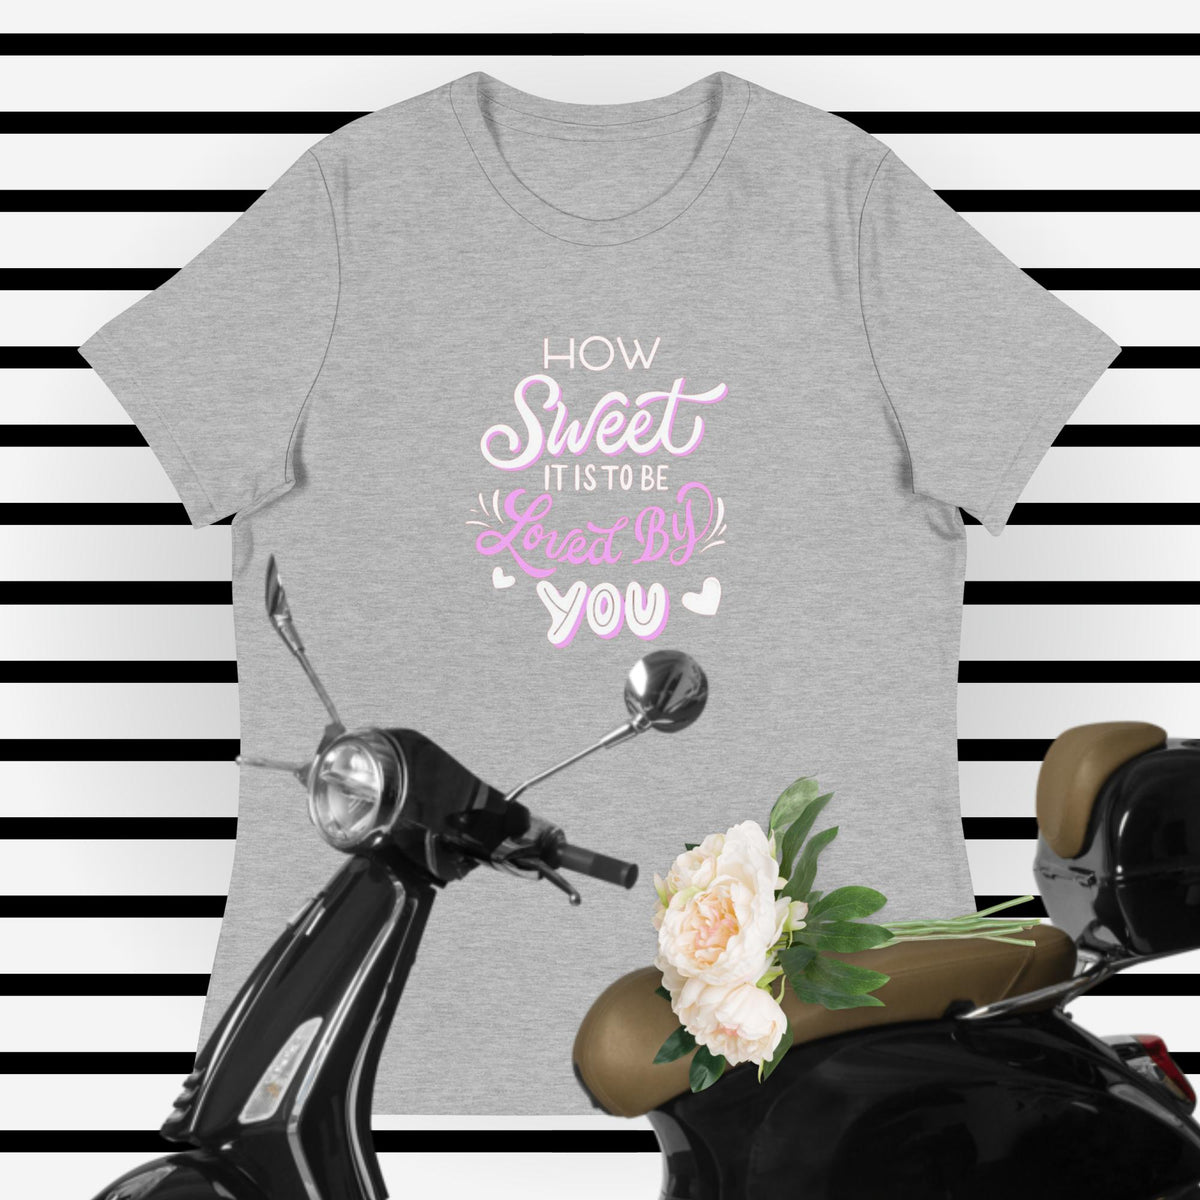 How Sweet It Is To Be Loved by You T-Shirts